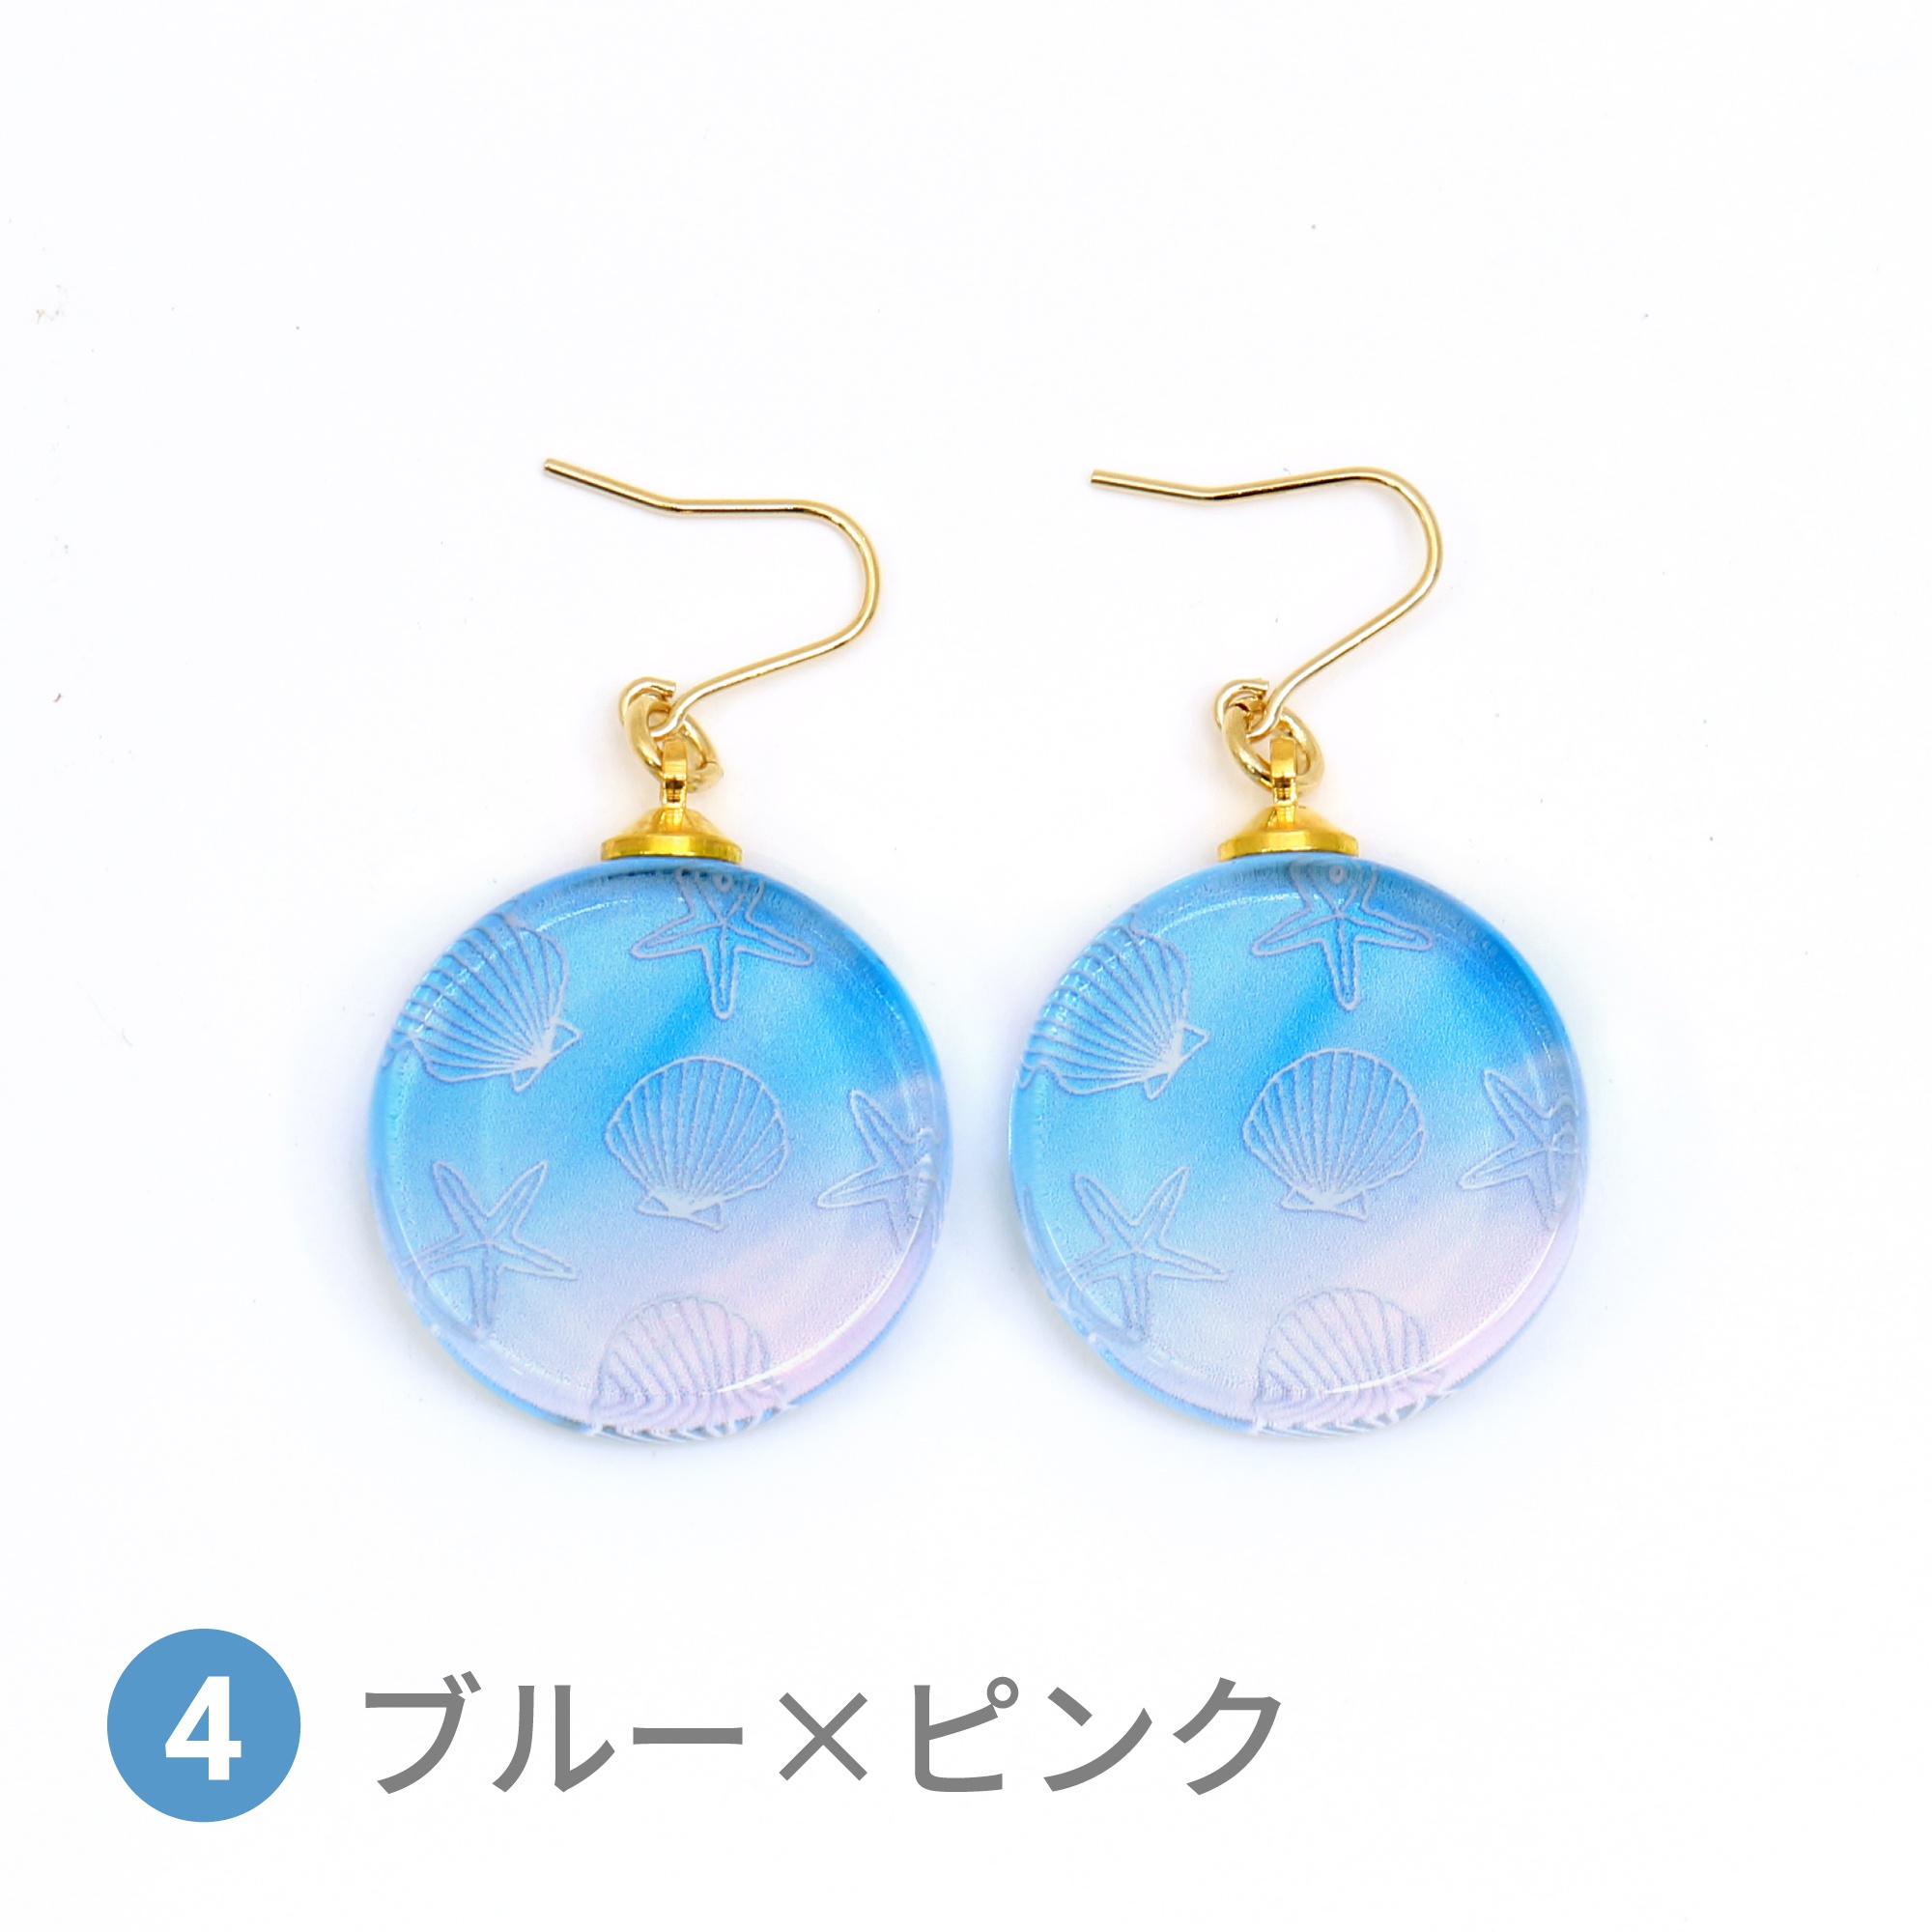 Glass accessories Pierced Earring SHELL blue & pink round shape